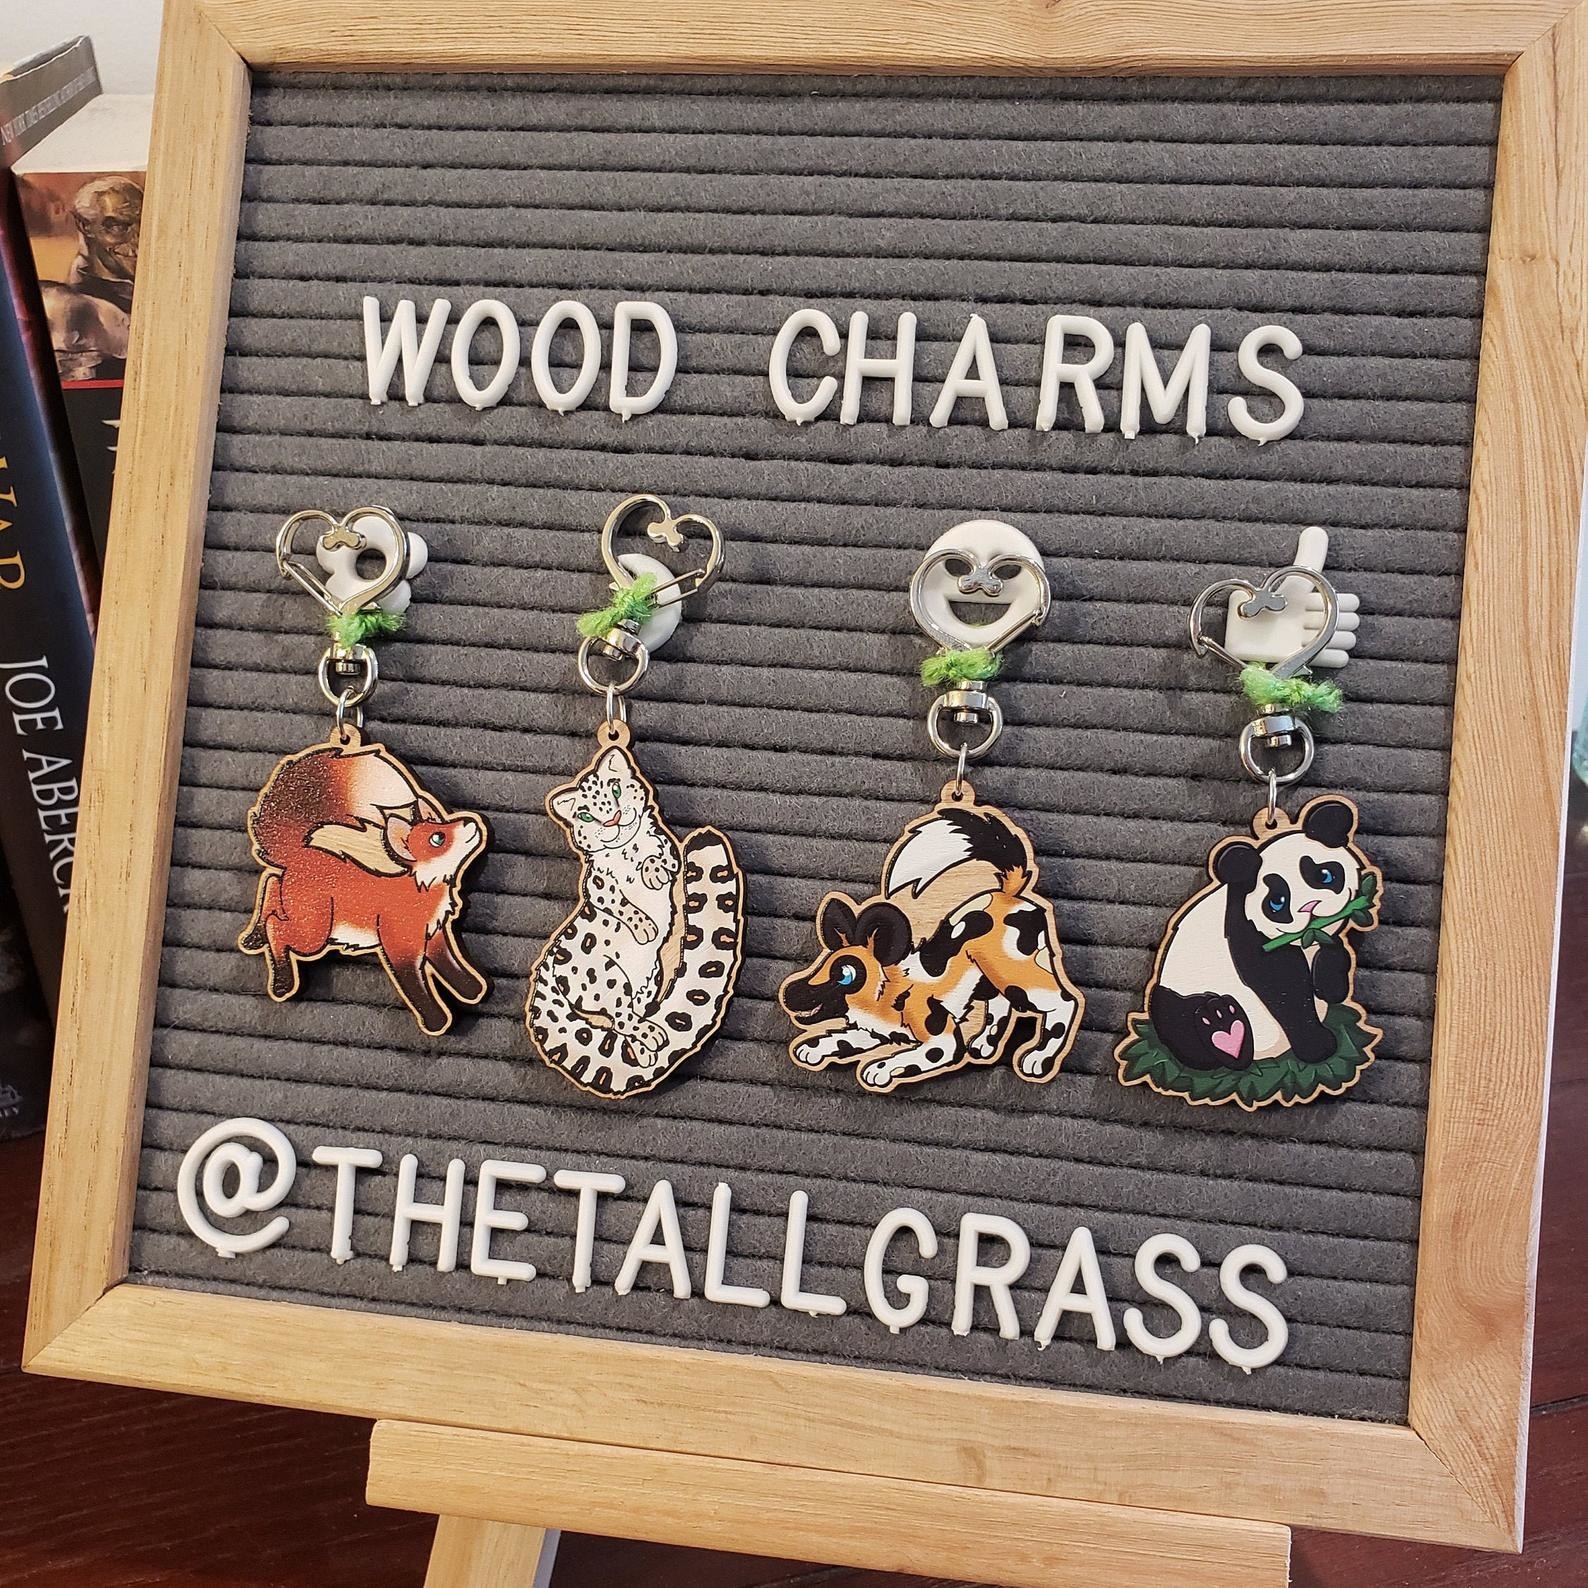 Four woodland charms of a fox, leopard, dog, and panda